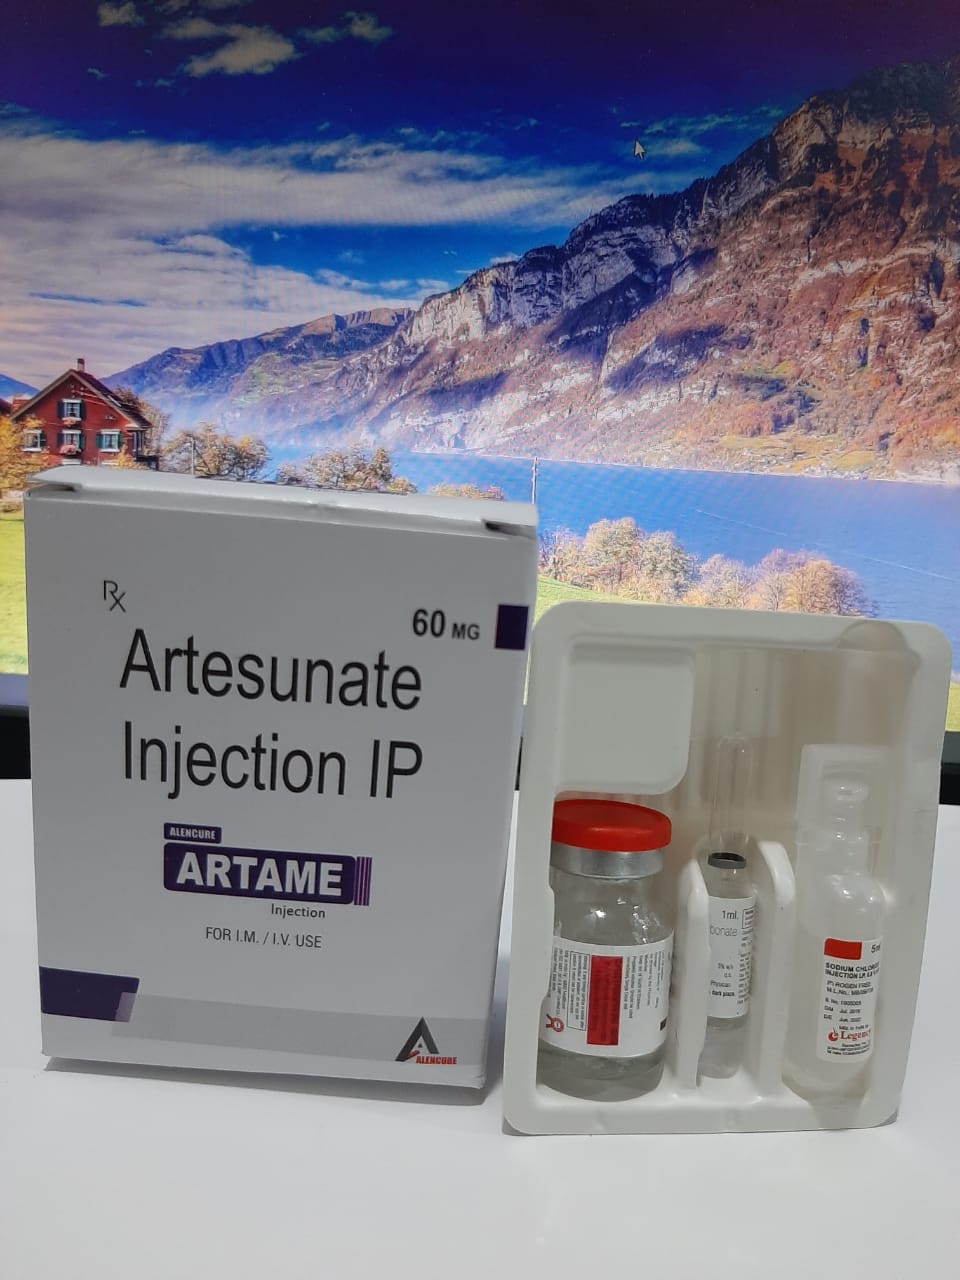 Product Name: Artame, Compositions of Artame are Artesunate Injection IP - Alencure Biotech Pvt Ltd